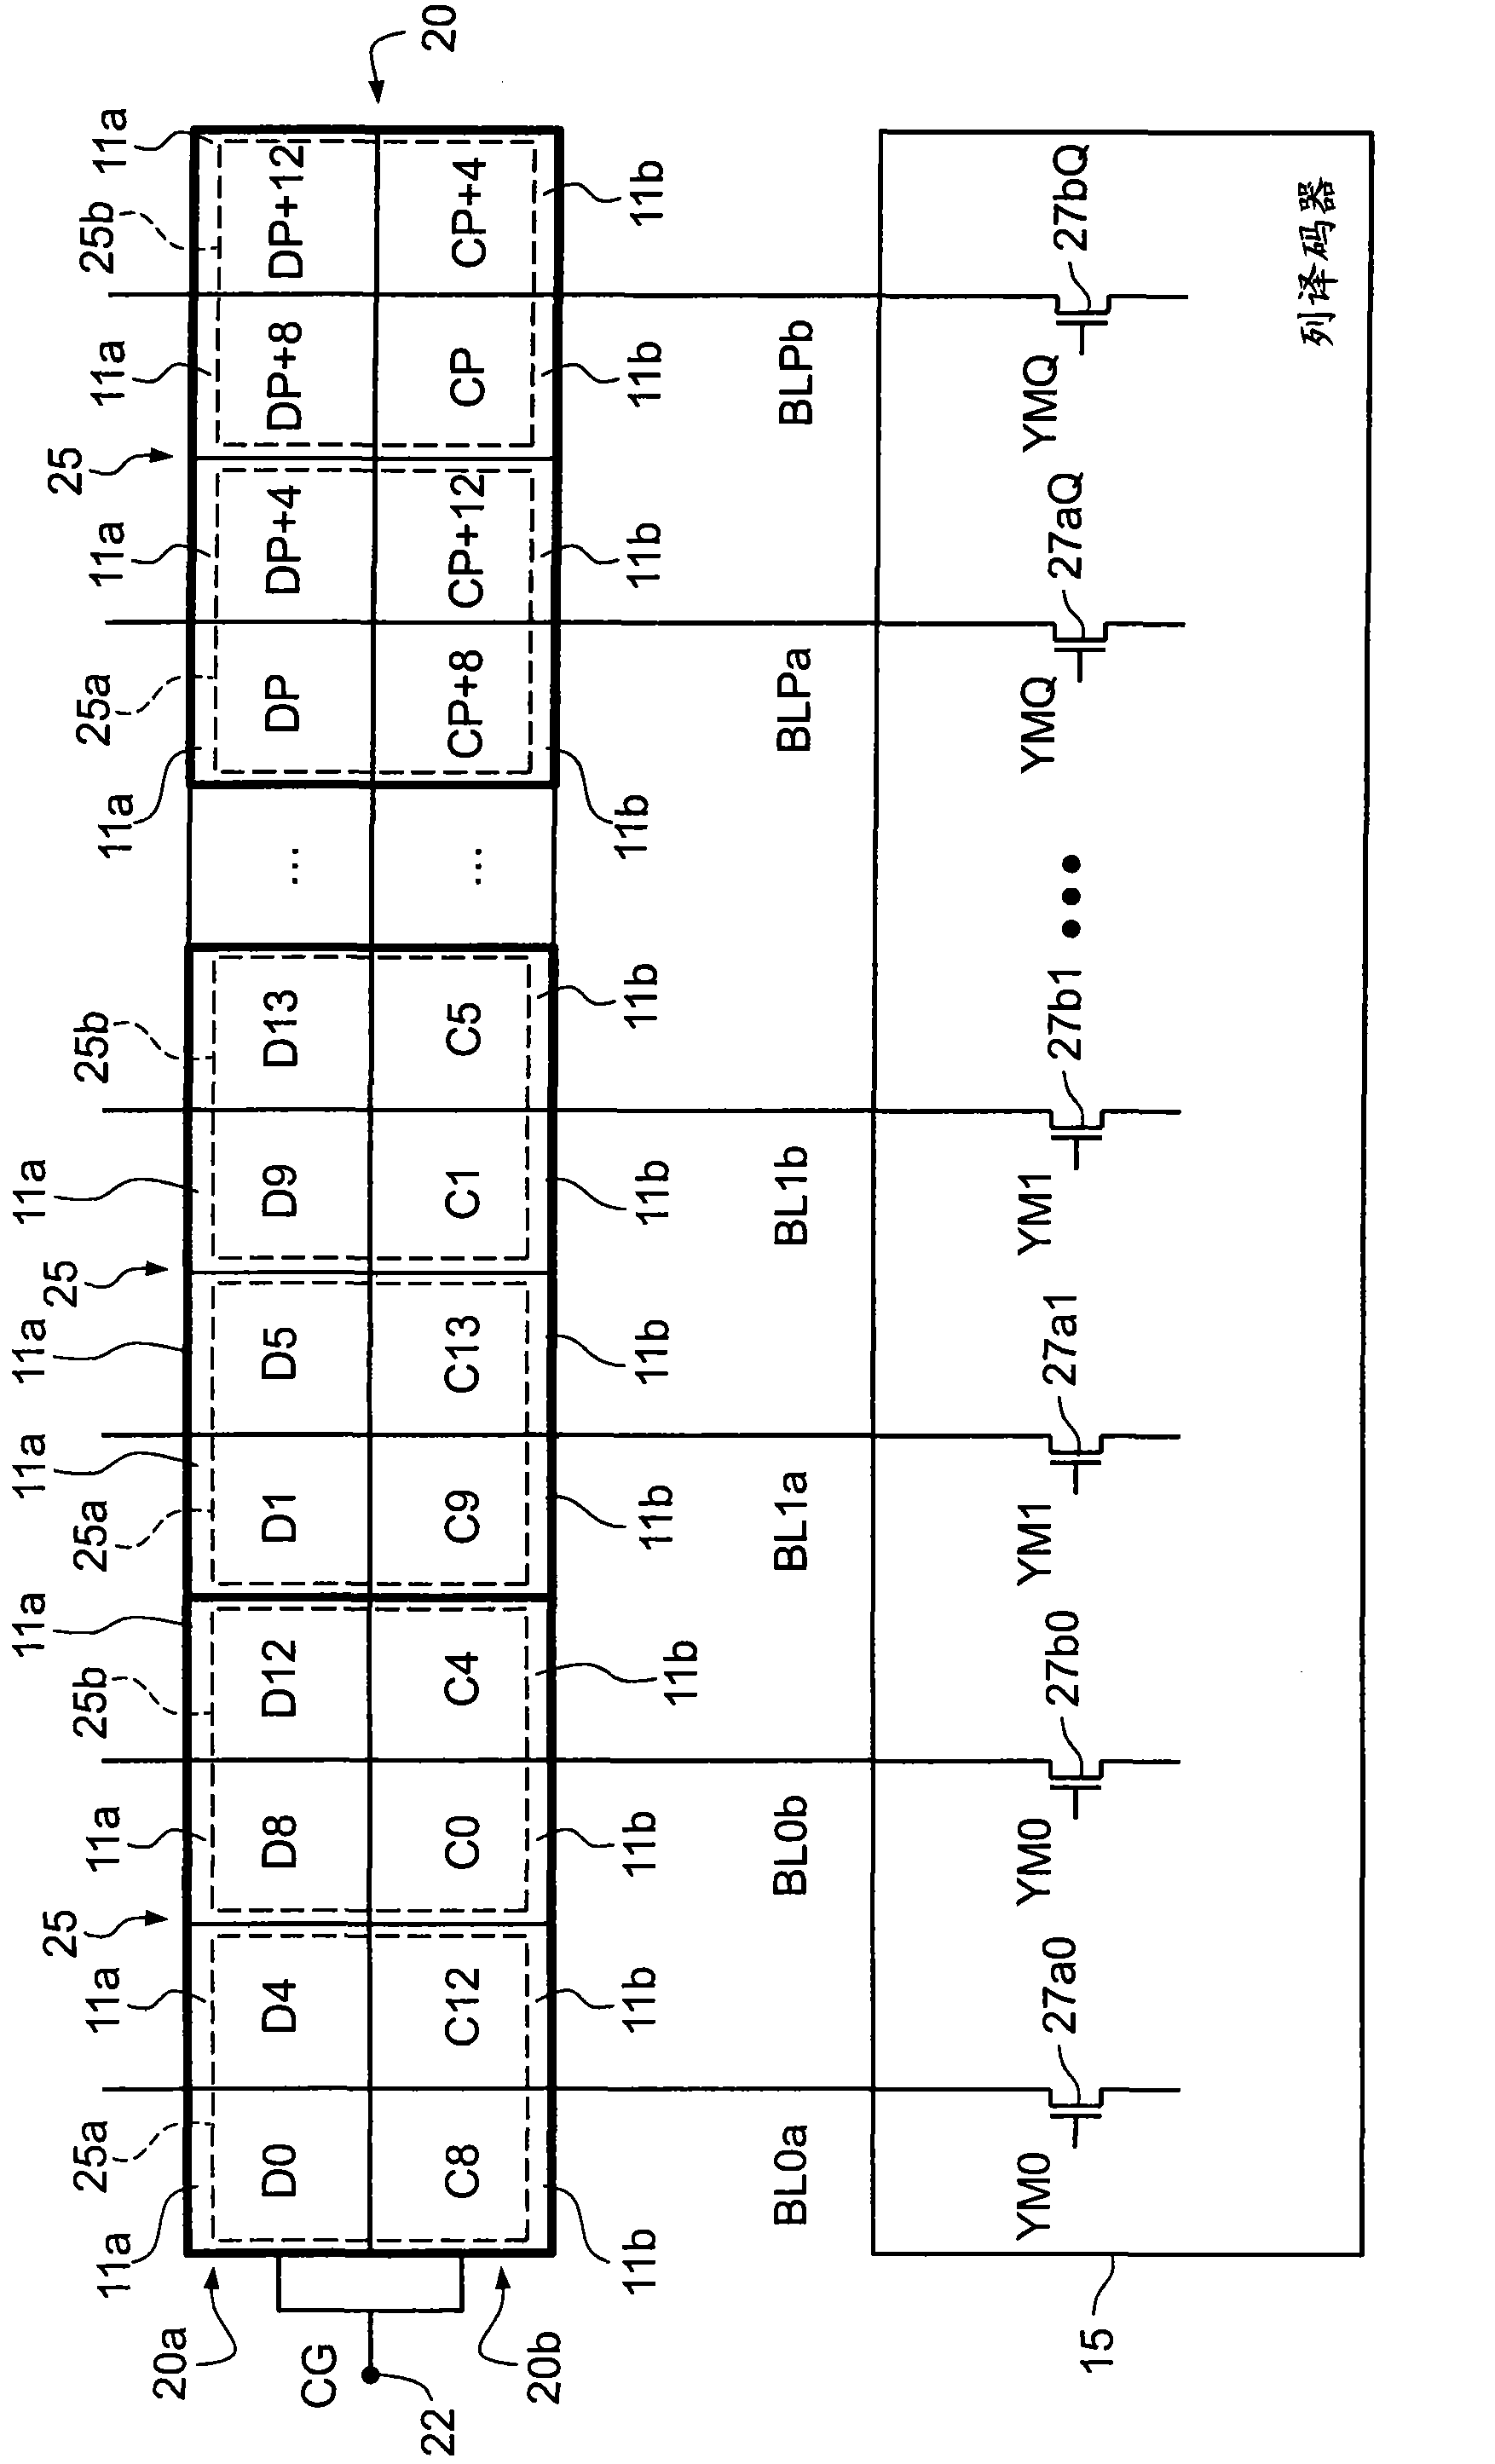 Non-volatile memory device with clustered memory cells